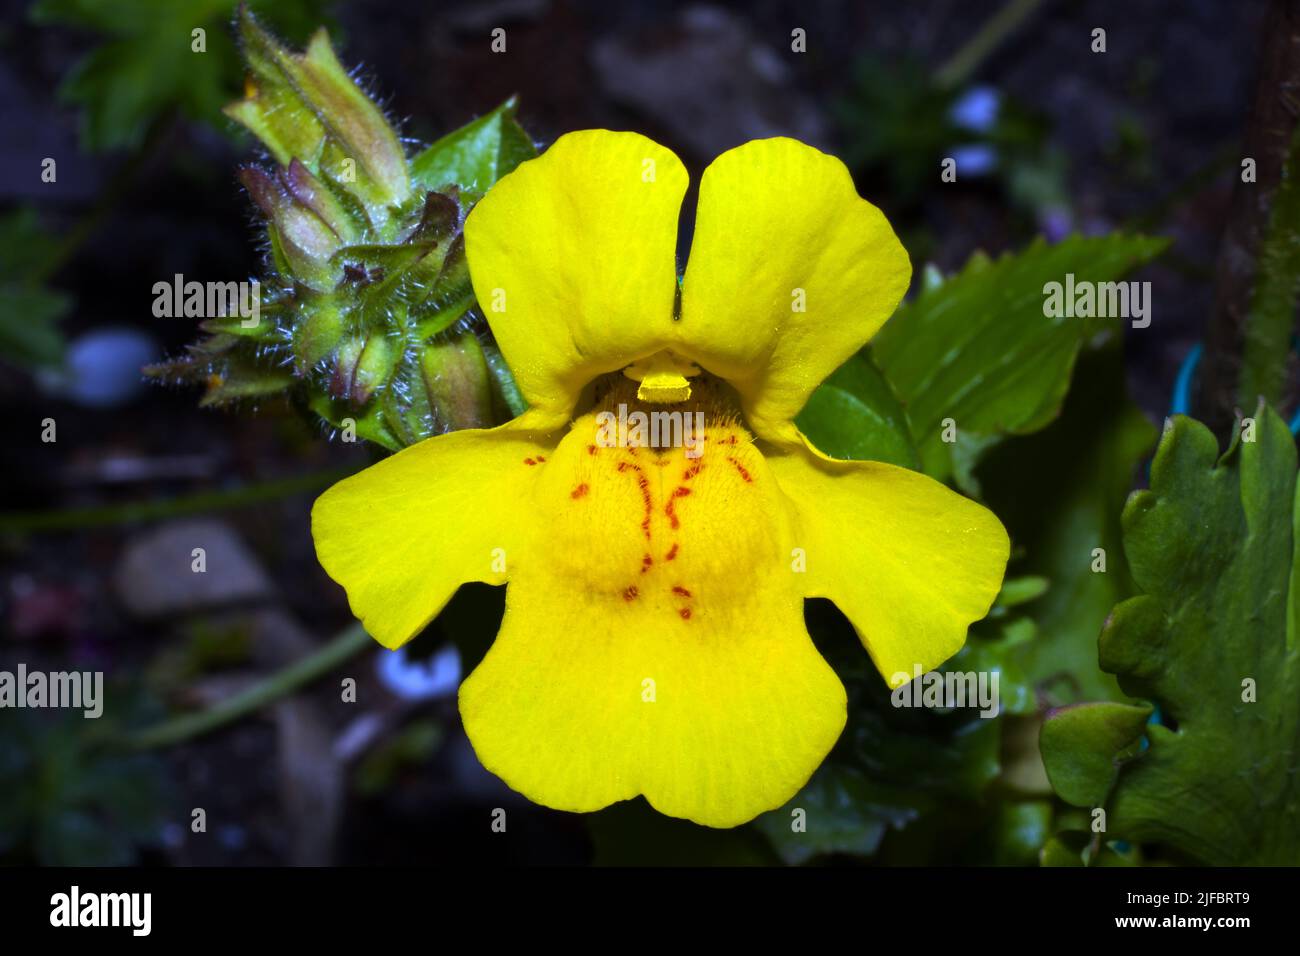 Mimulus guttatus (common yellow monkeyflower) grows along the banks of streams throughout much of western North America but introduced to many places. Stock Photo